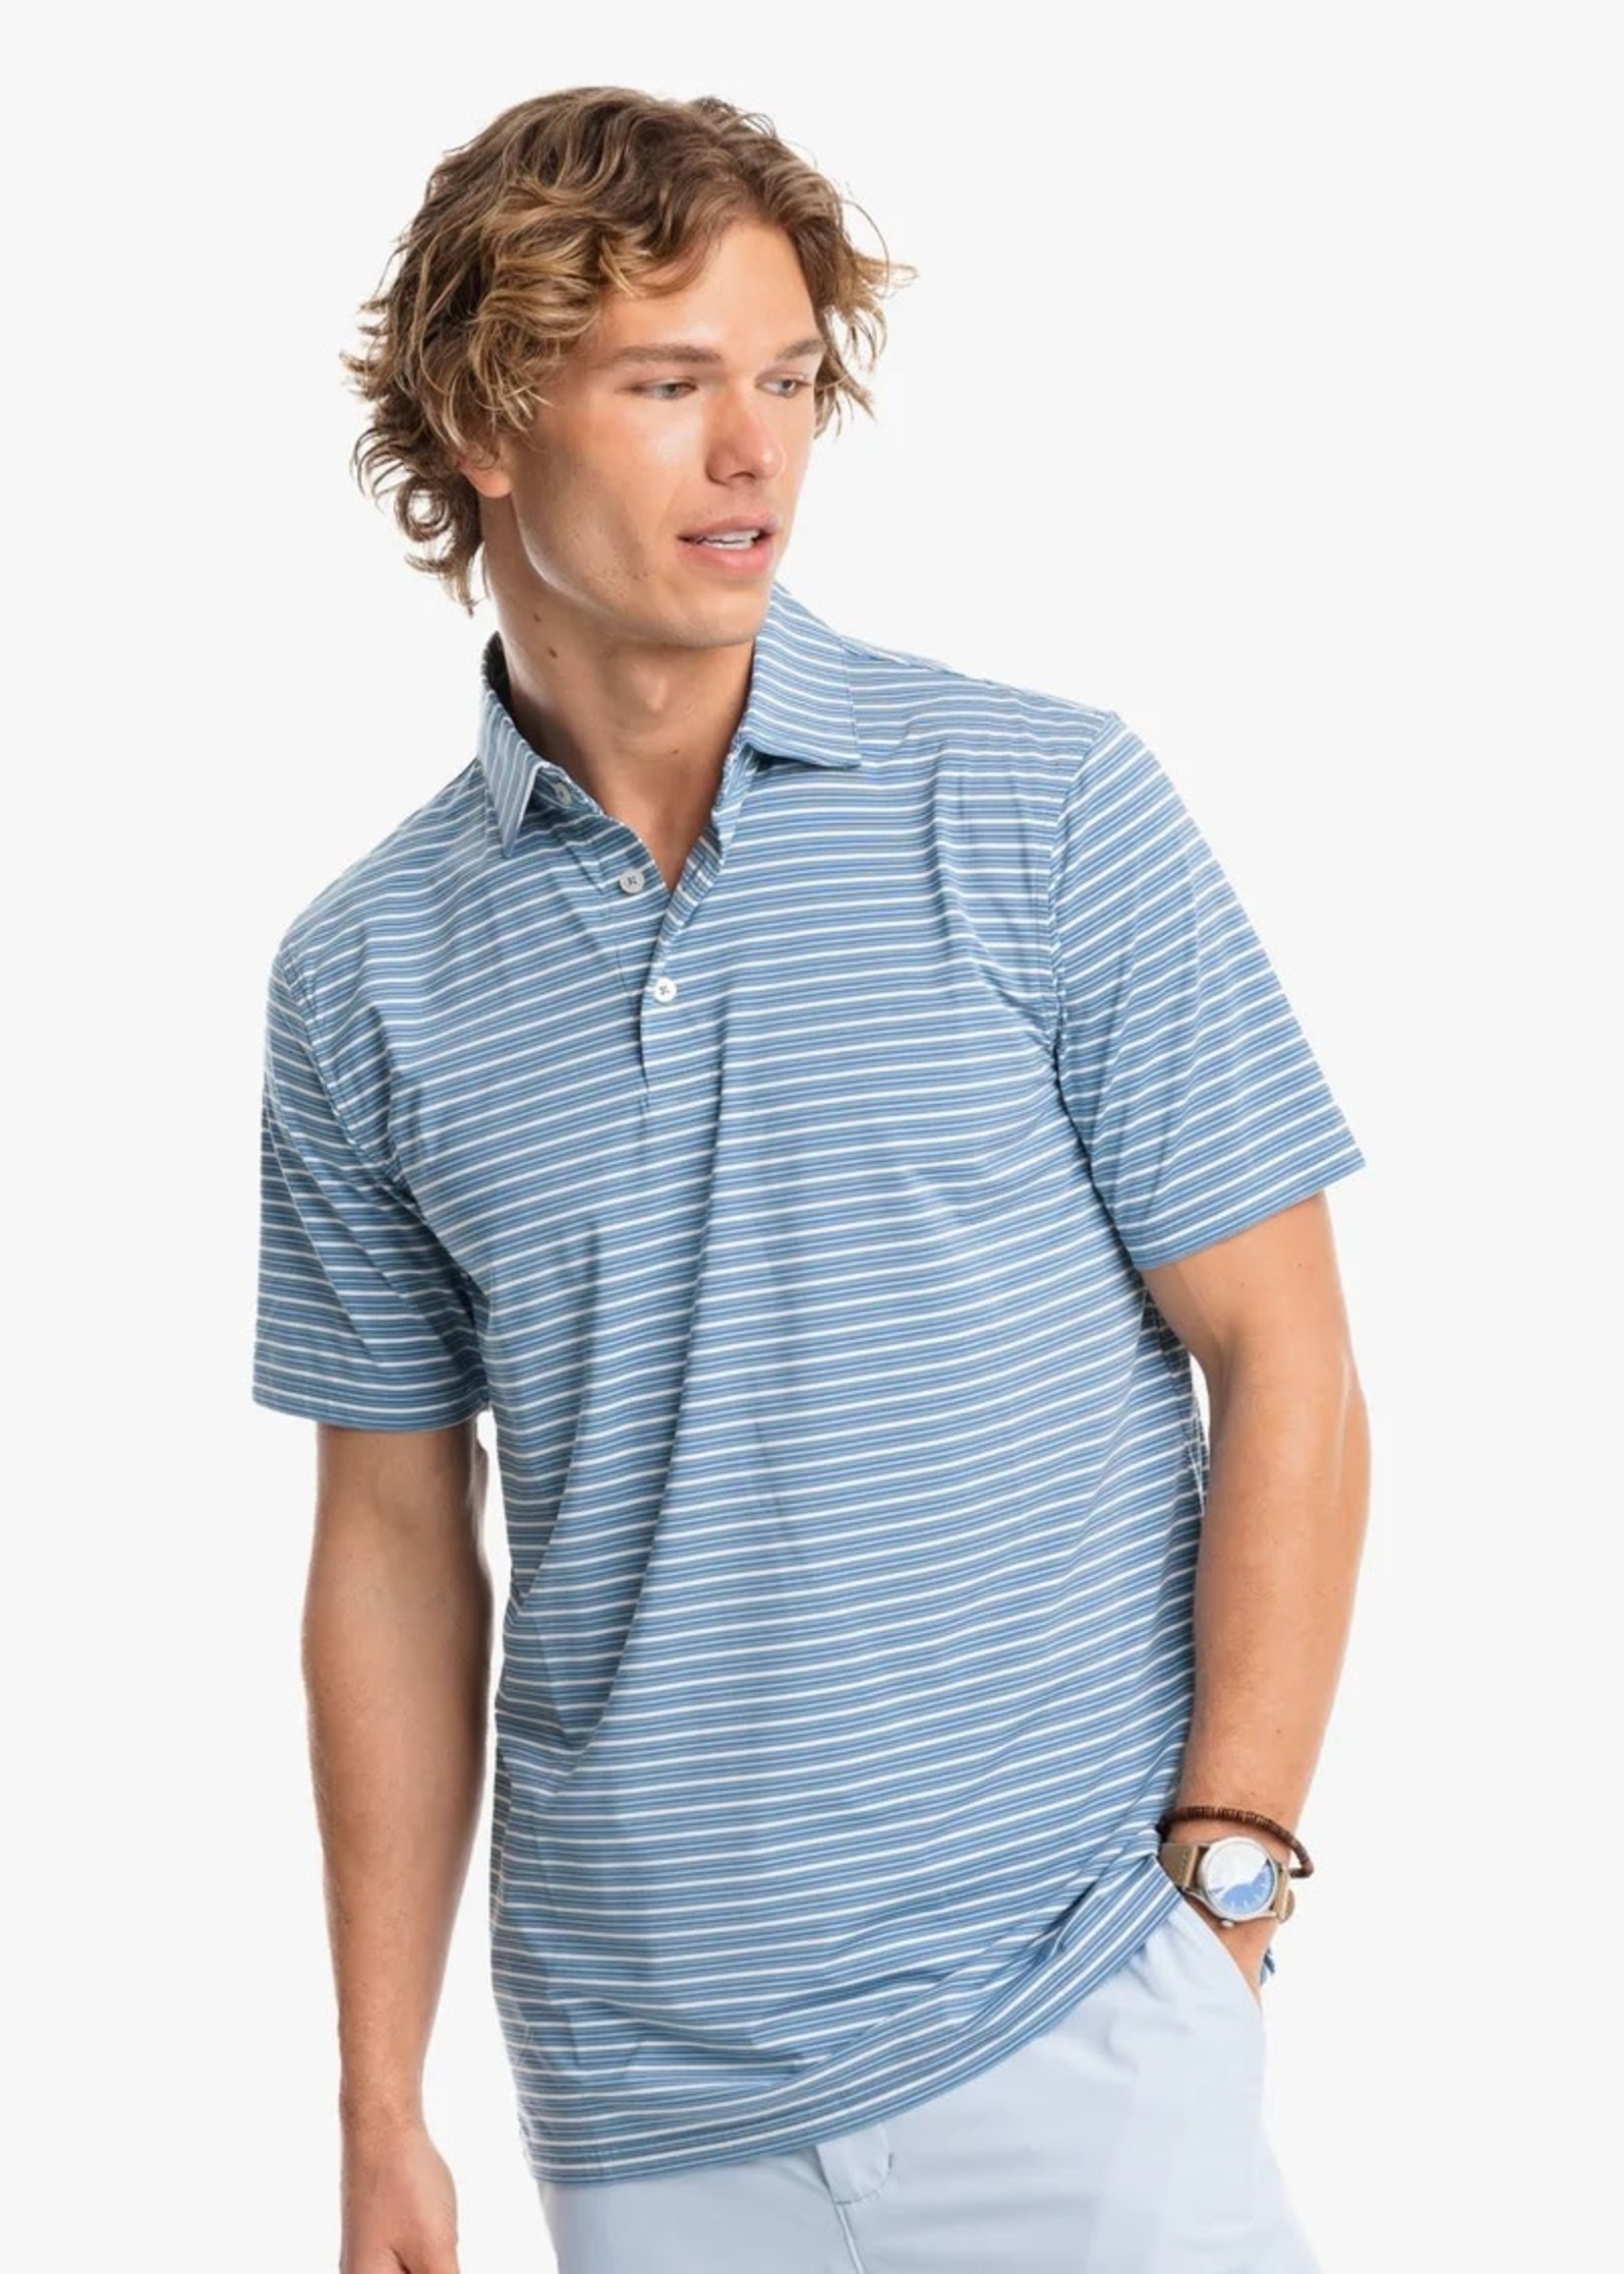 Southern Tide Overseas Stripped Performance Polo